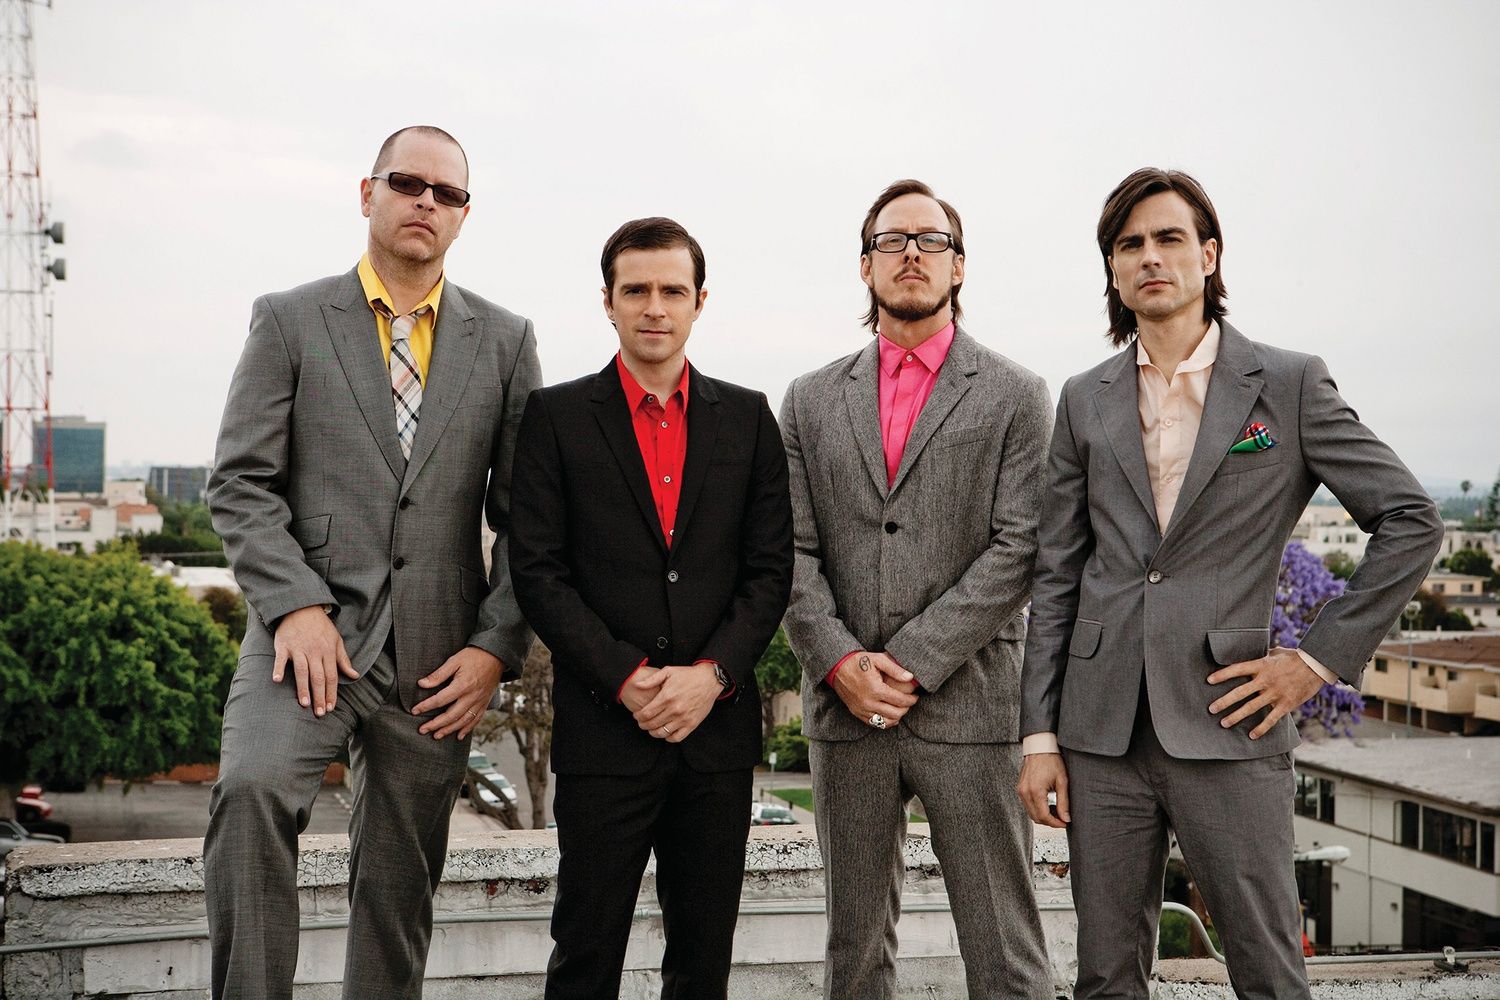 Weezer's new album, Everything Will Be Alright In The End, is out now.